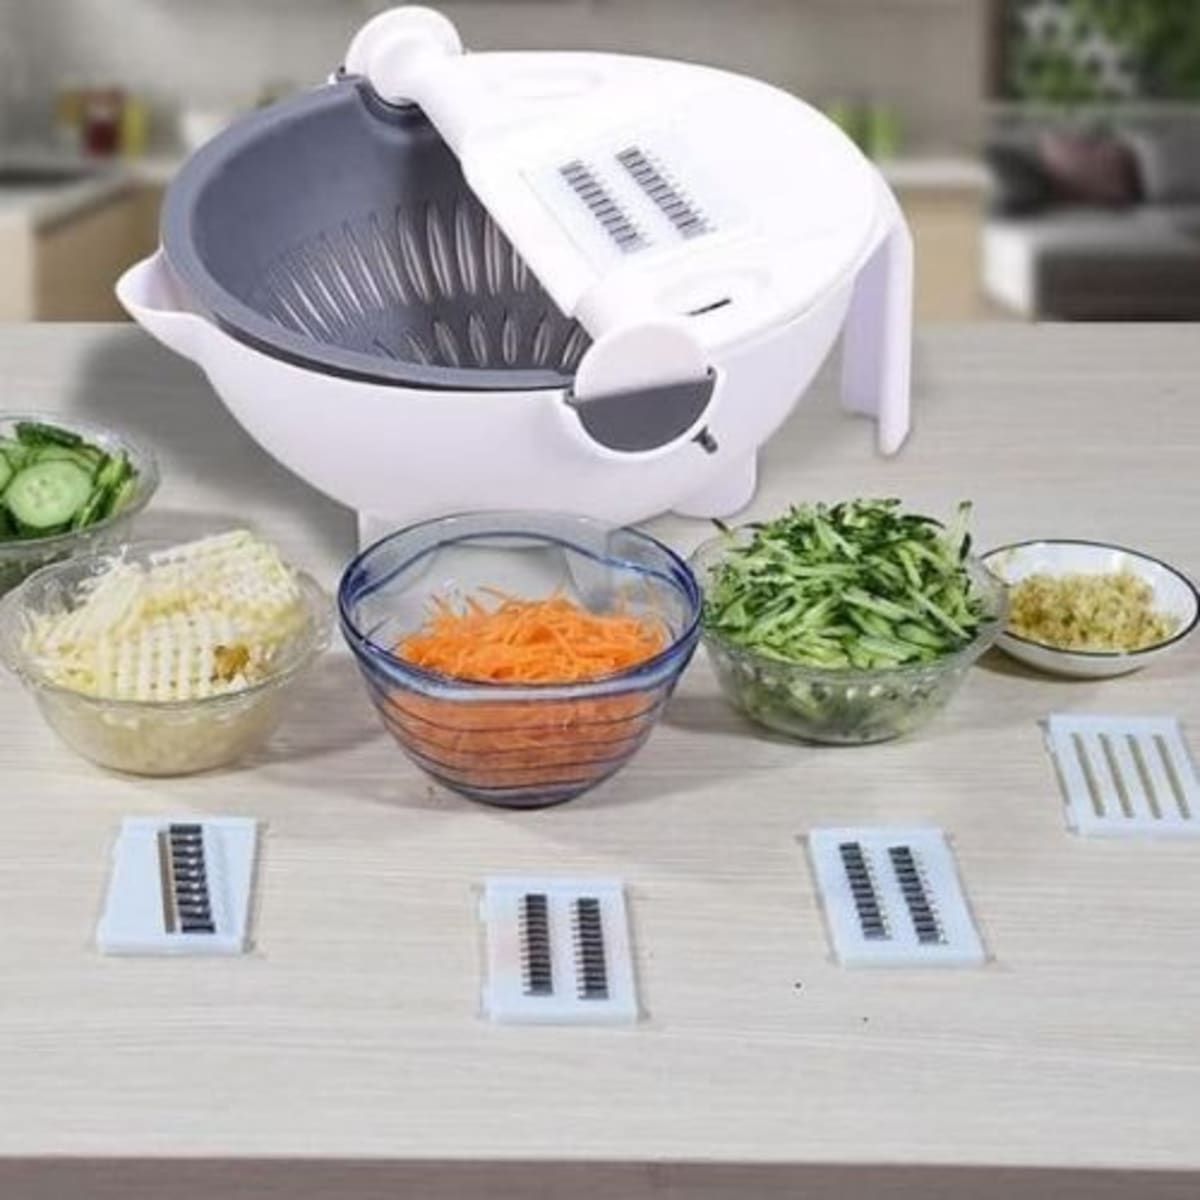 Magic Rotate 9 In 1 Multi-function Vegetable Cutter With Drain Basket